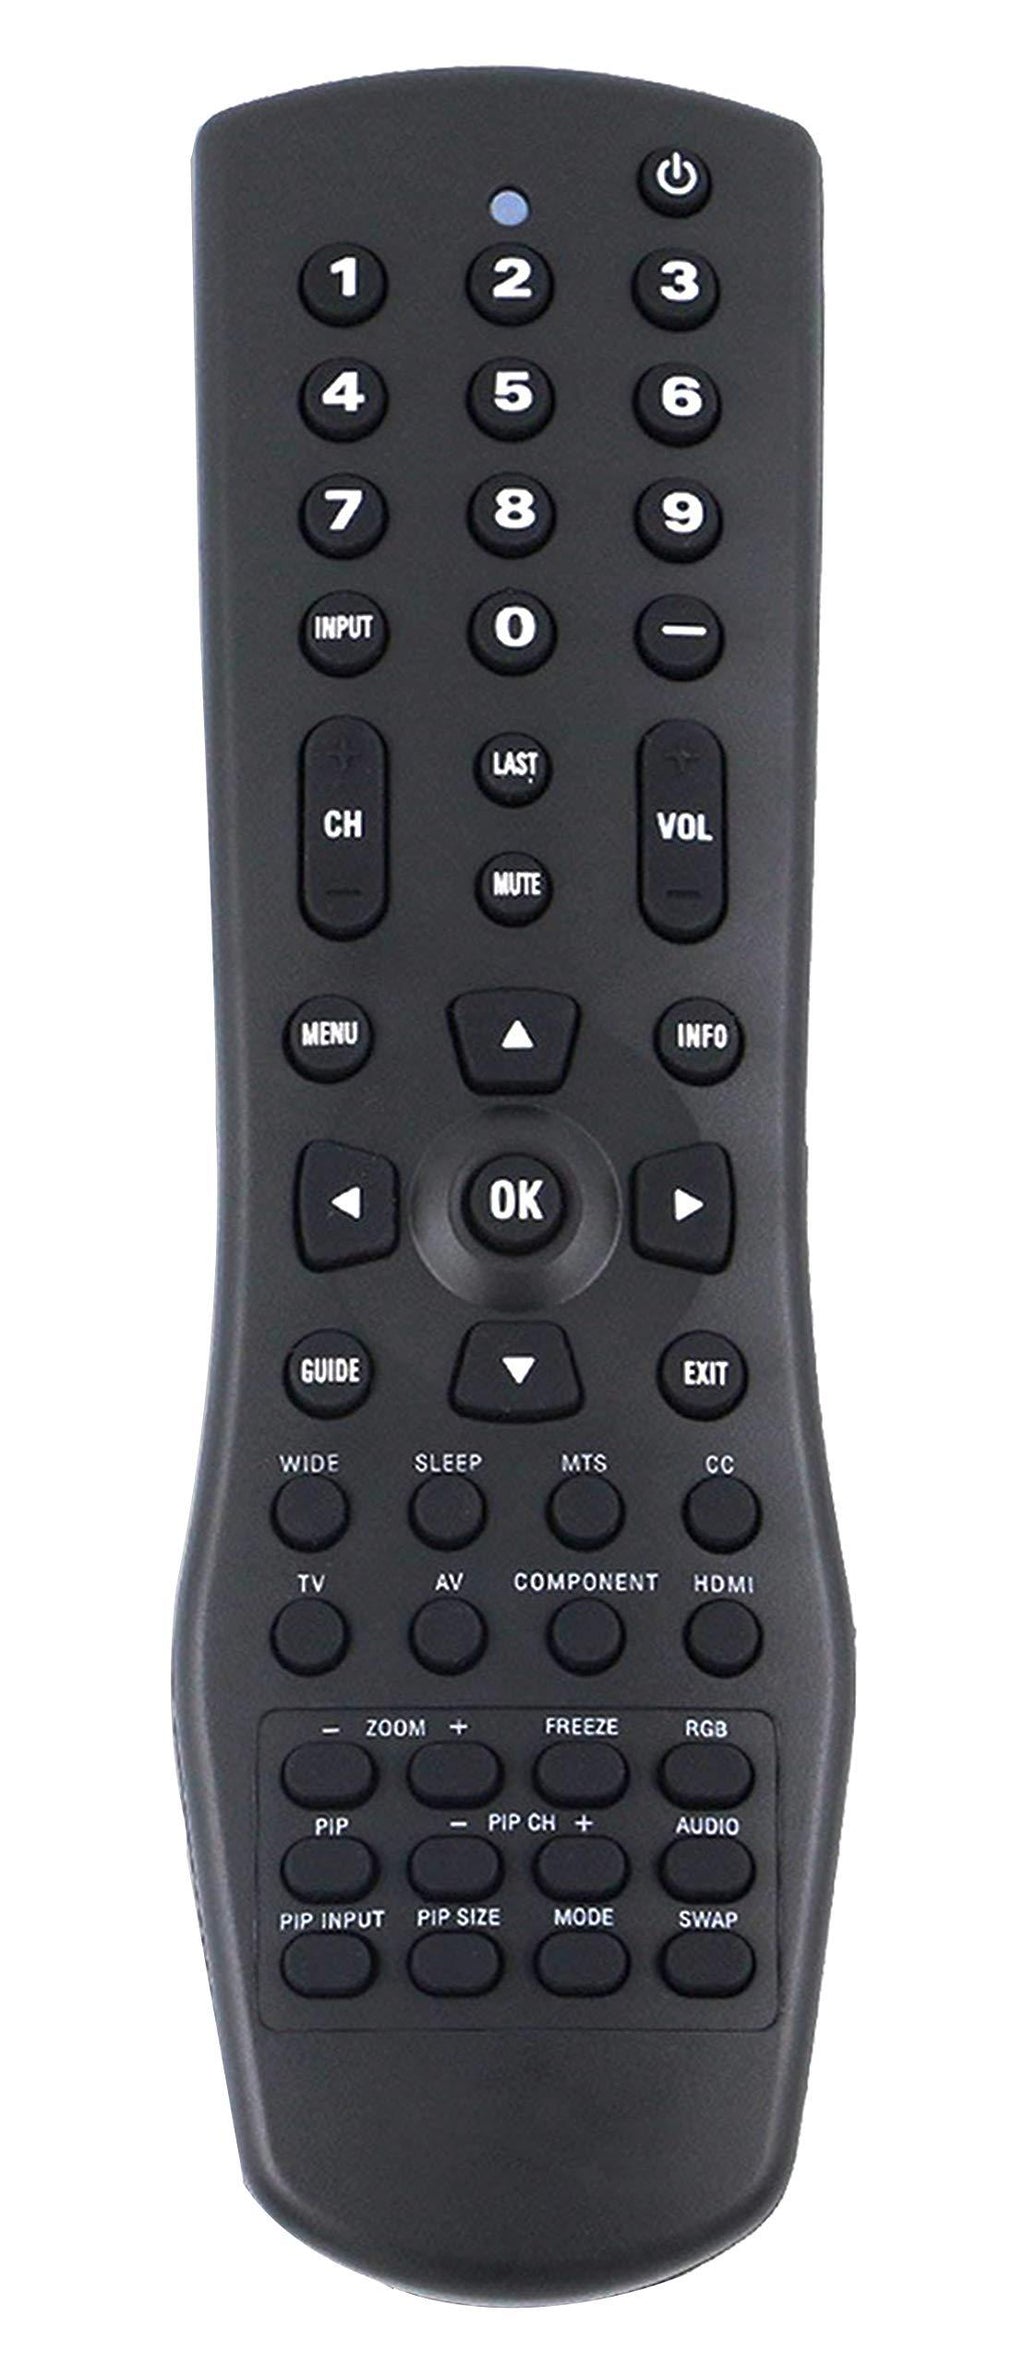 AULCMEET VR1 Remote Control fit for VIZIO LCD HDTV 0980-0304-9150 JV50P VA19L L42 L37 L32 GV47L GV46L GV42L VX52L VX42L VX37L VW42L VW37L VW26L VW22L VU42L VS42L VA26L VA22L VA220E